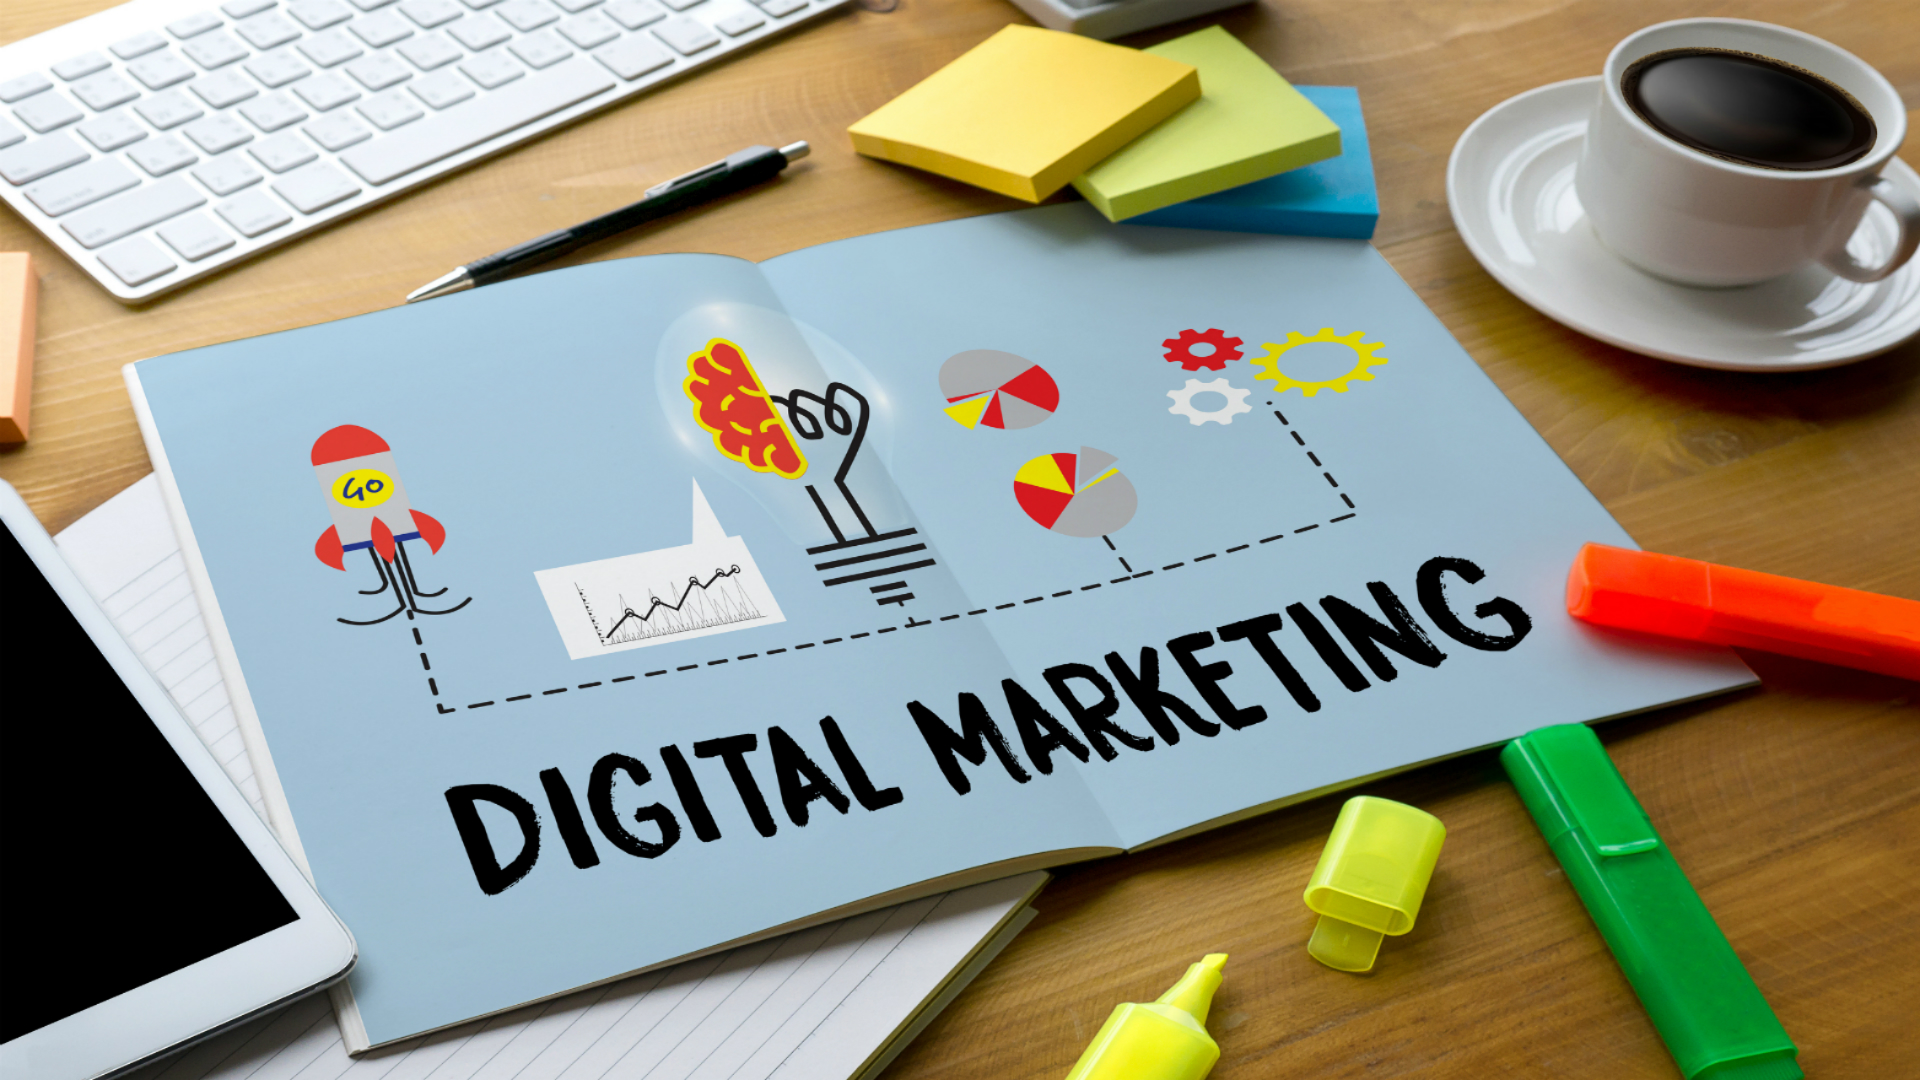 Digital-Marketing-The-Ultimate-Way-to-Boost-Your-Business.jpg